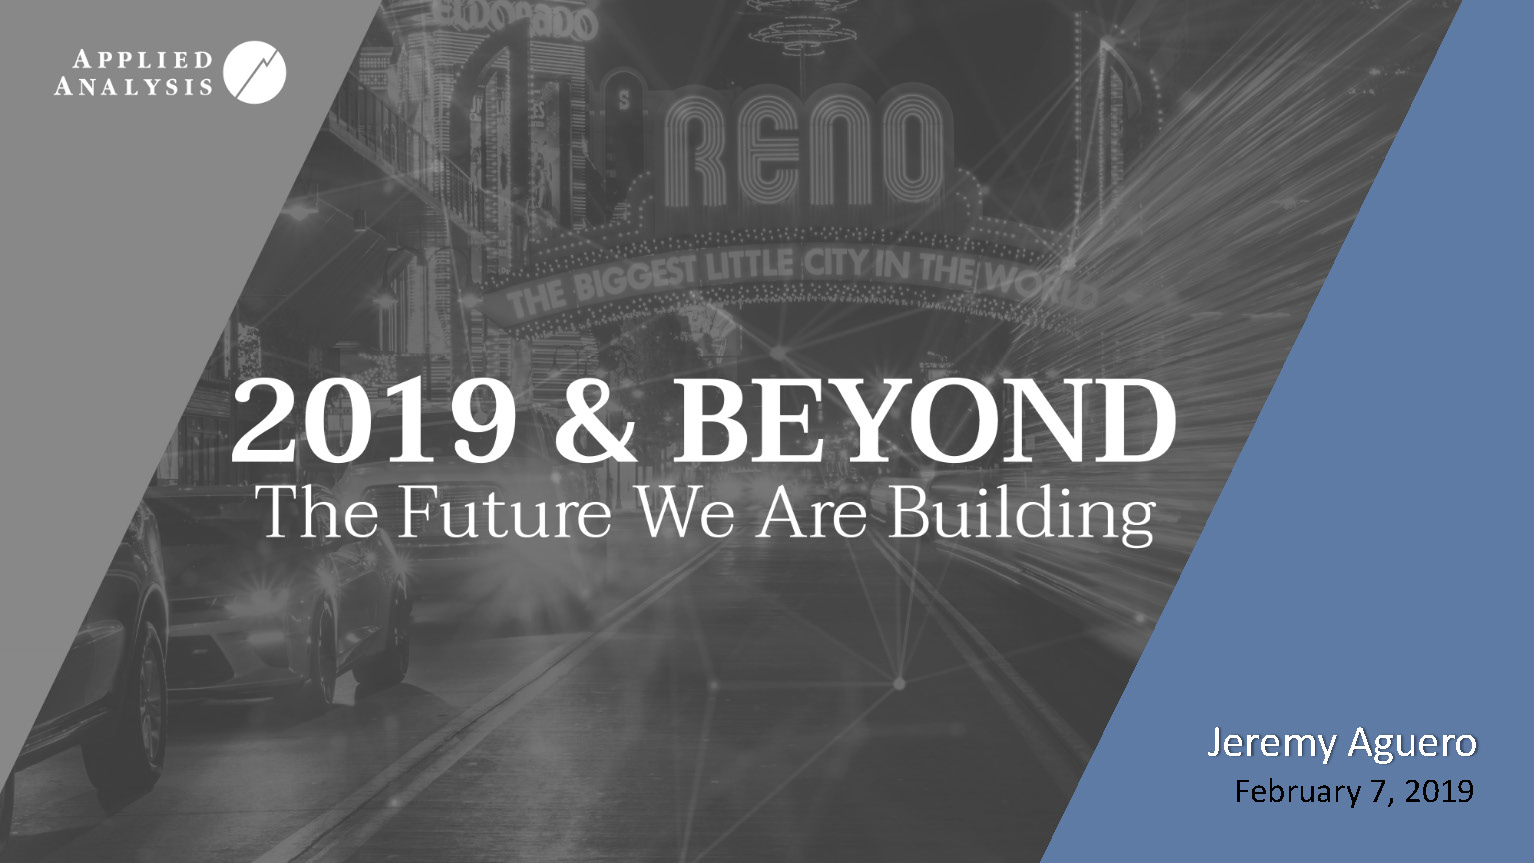 Economic Development Authority of Western Nevada 2019 & Beyond: The Future We Are Building